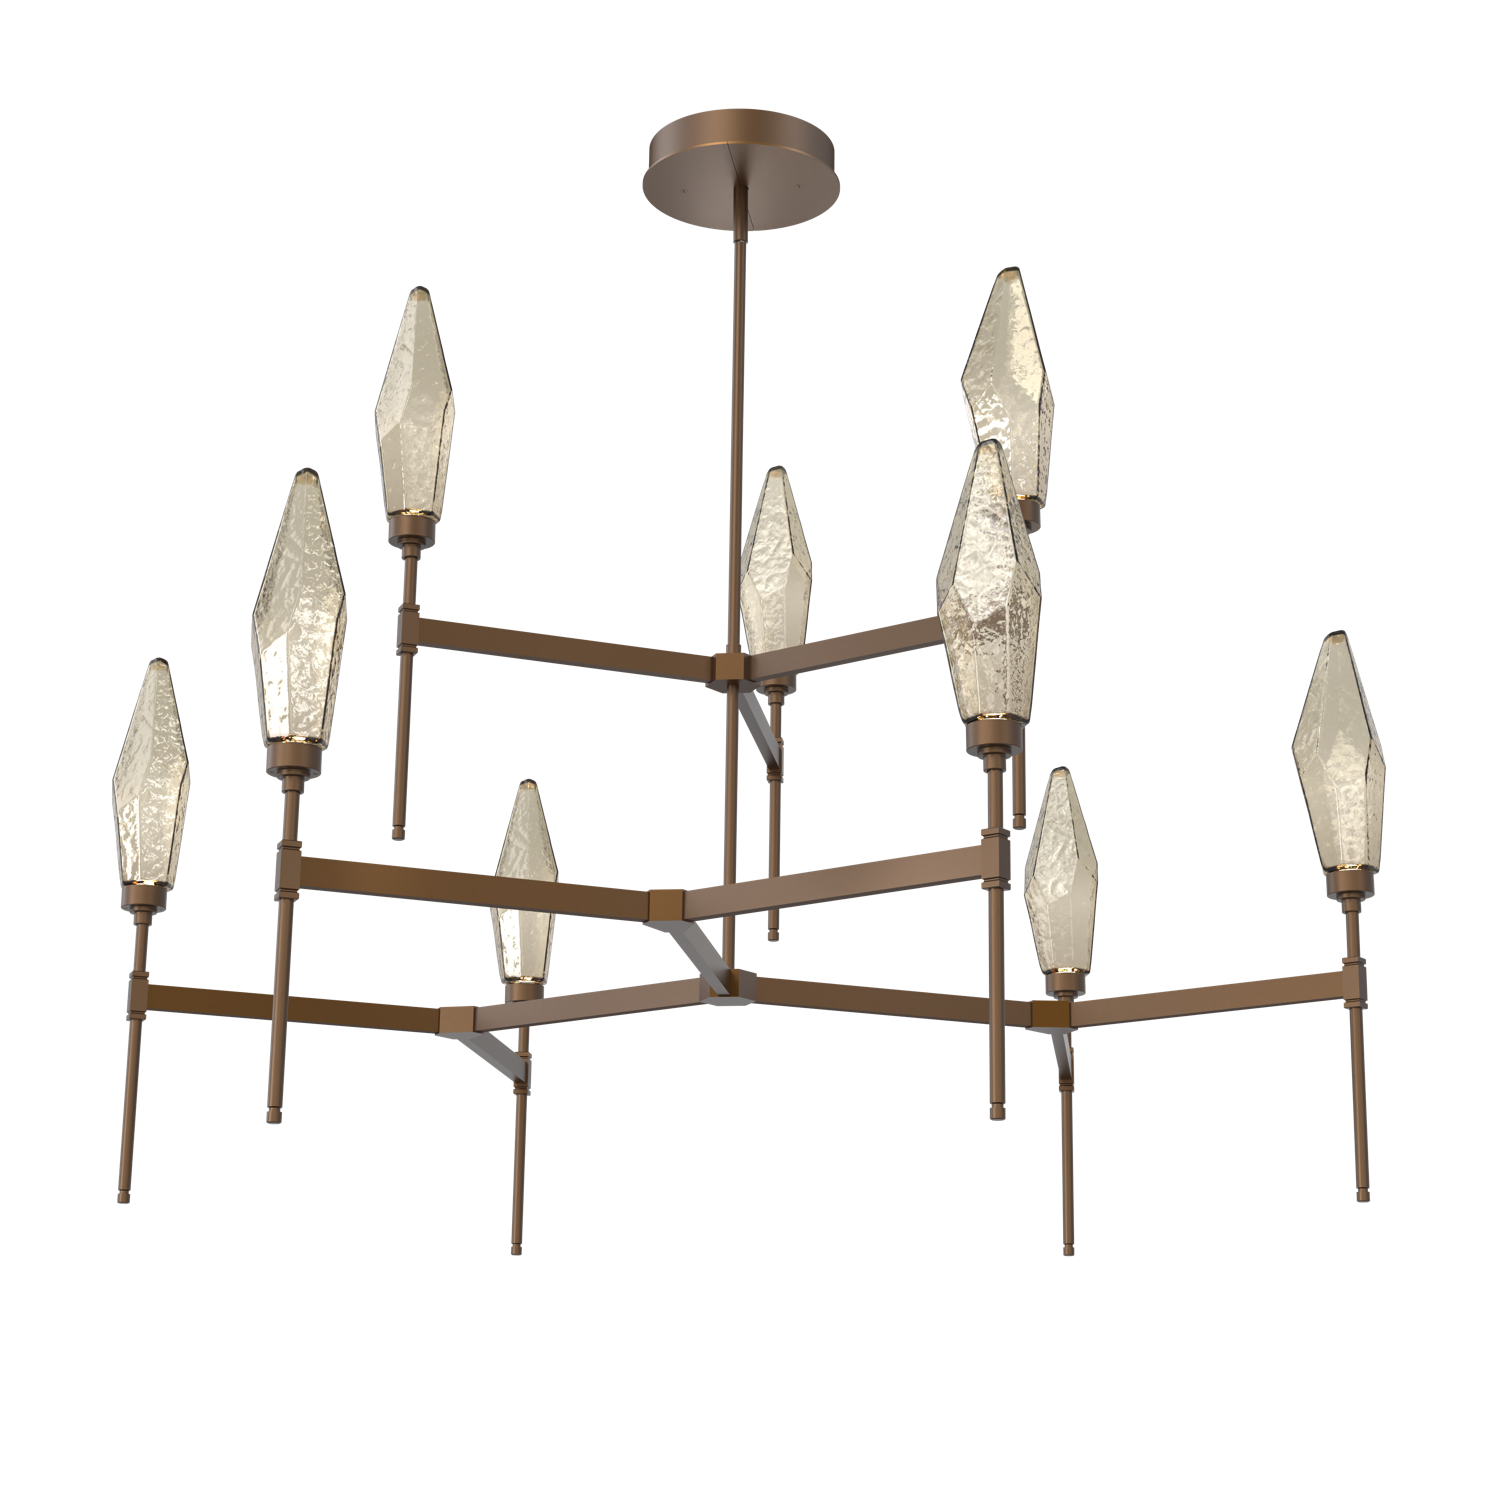 CHB0050-54-FB-CB-Hammerton-Studio-Rock-Crystal-54-inch-round-two-tier-belvedere-chandelier-with-flat-bronze-finish-and-chilled-bronze-blown-glass-shades-and-LED-lamping